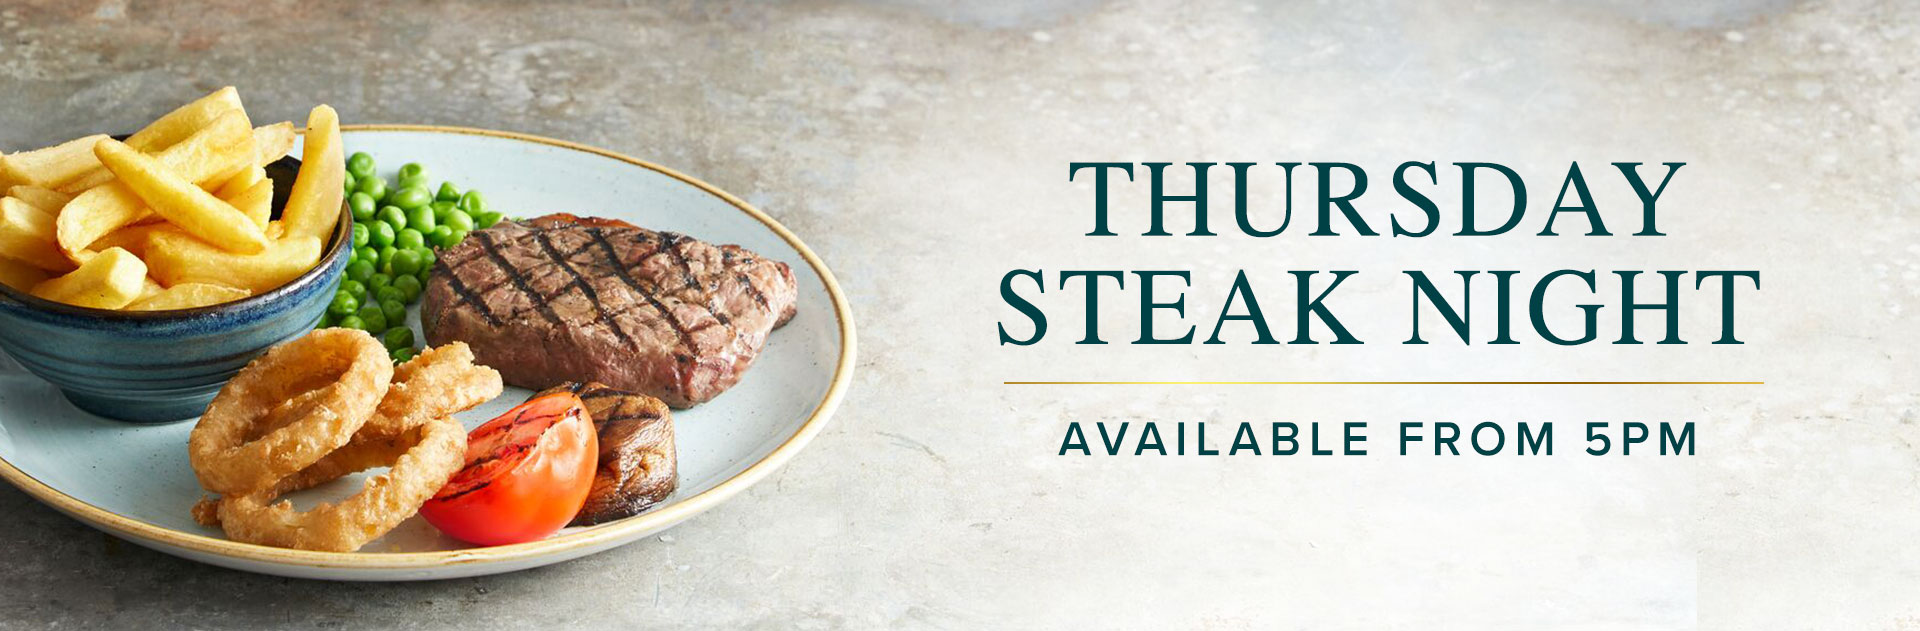 Thursday Steak Night at The Country Girl